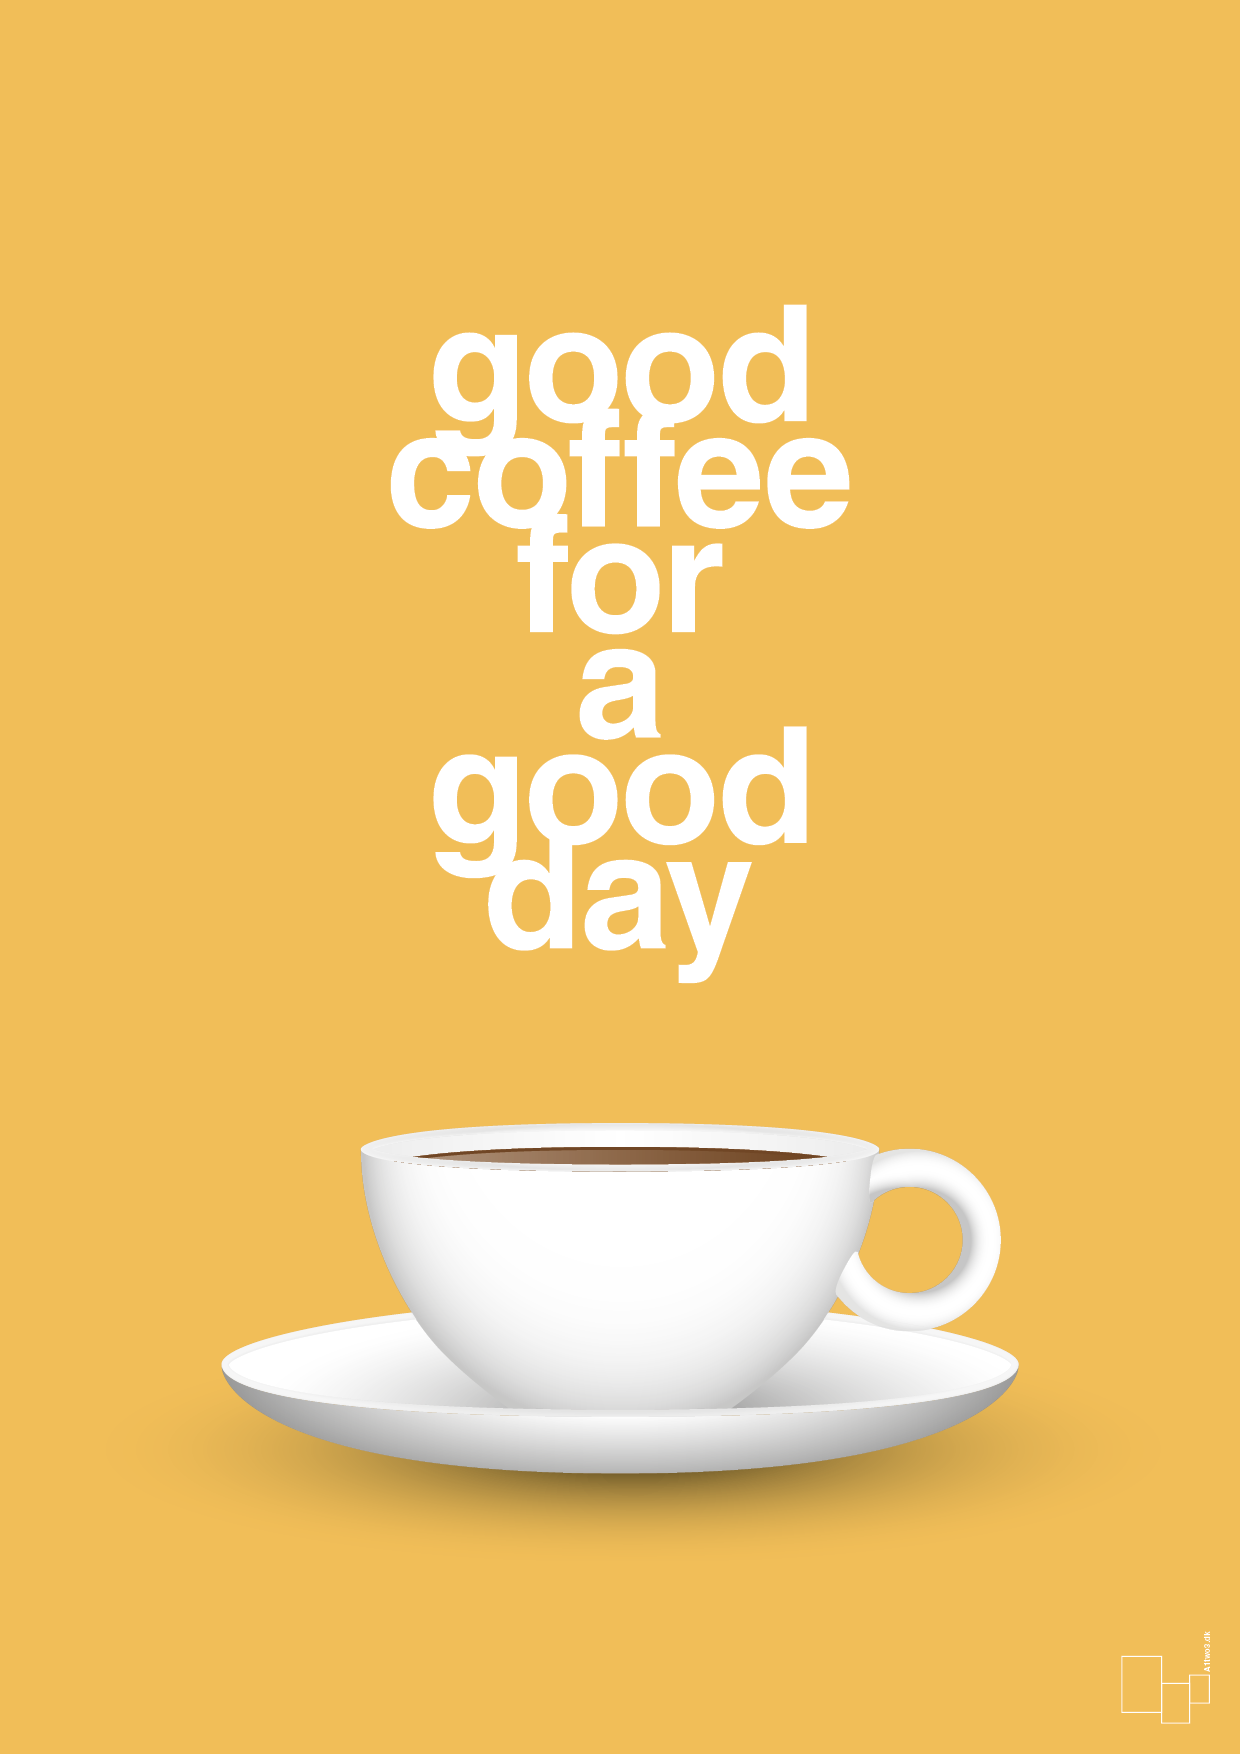 good coffee for a good day - Plakat med Mad & Drikke i Honeycomb